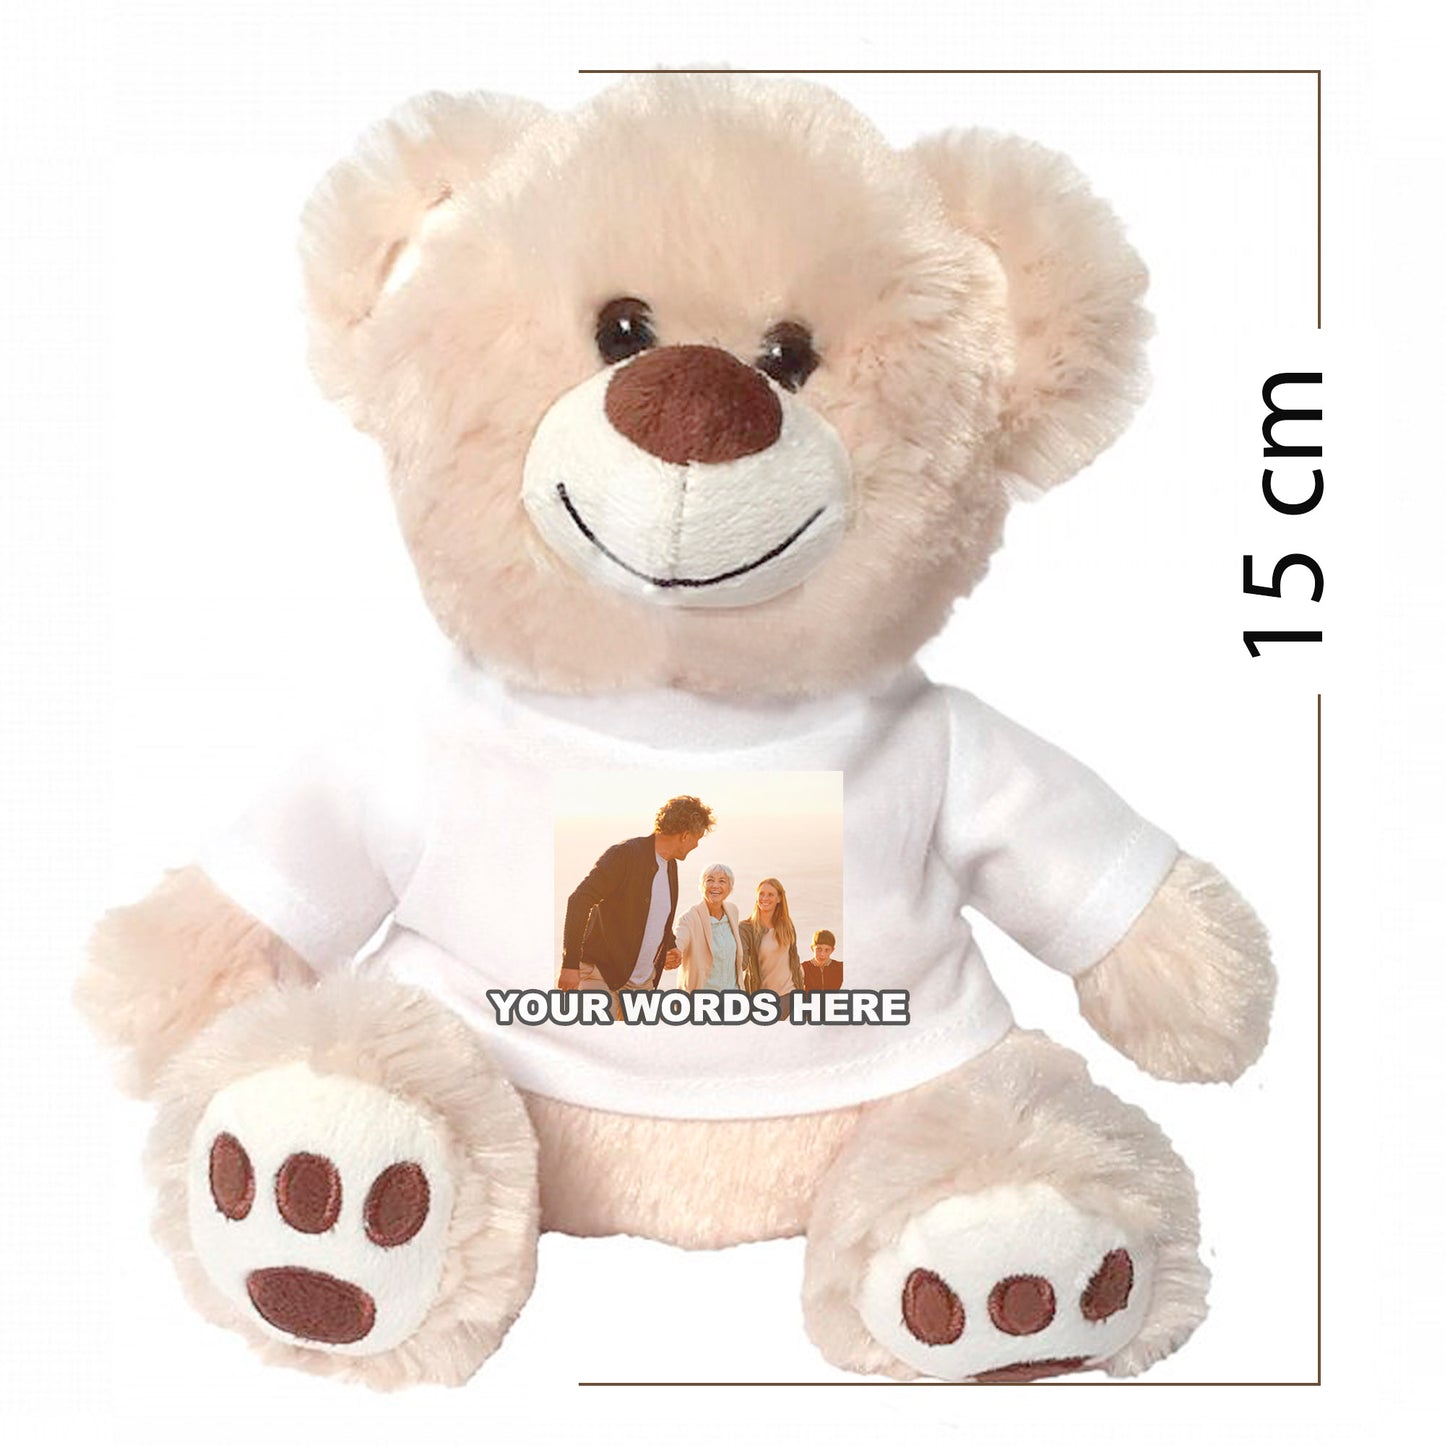 Personalised Teddy Bears our teddy bears make excellent gifts for all ages